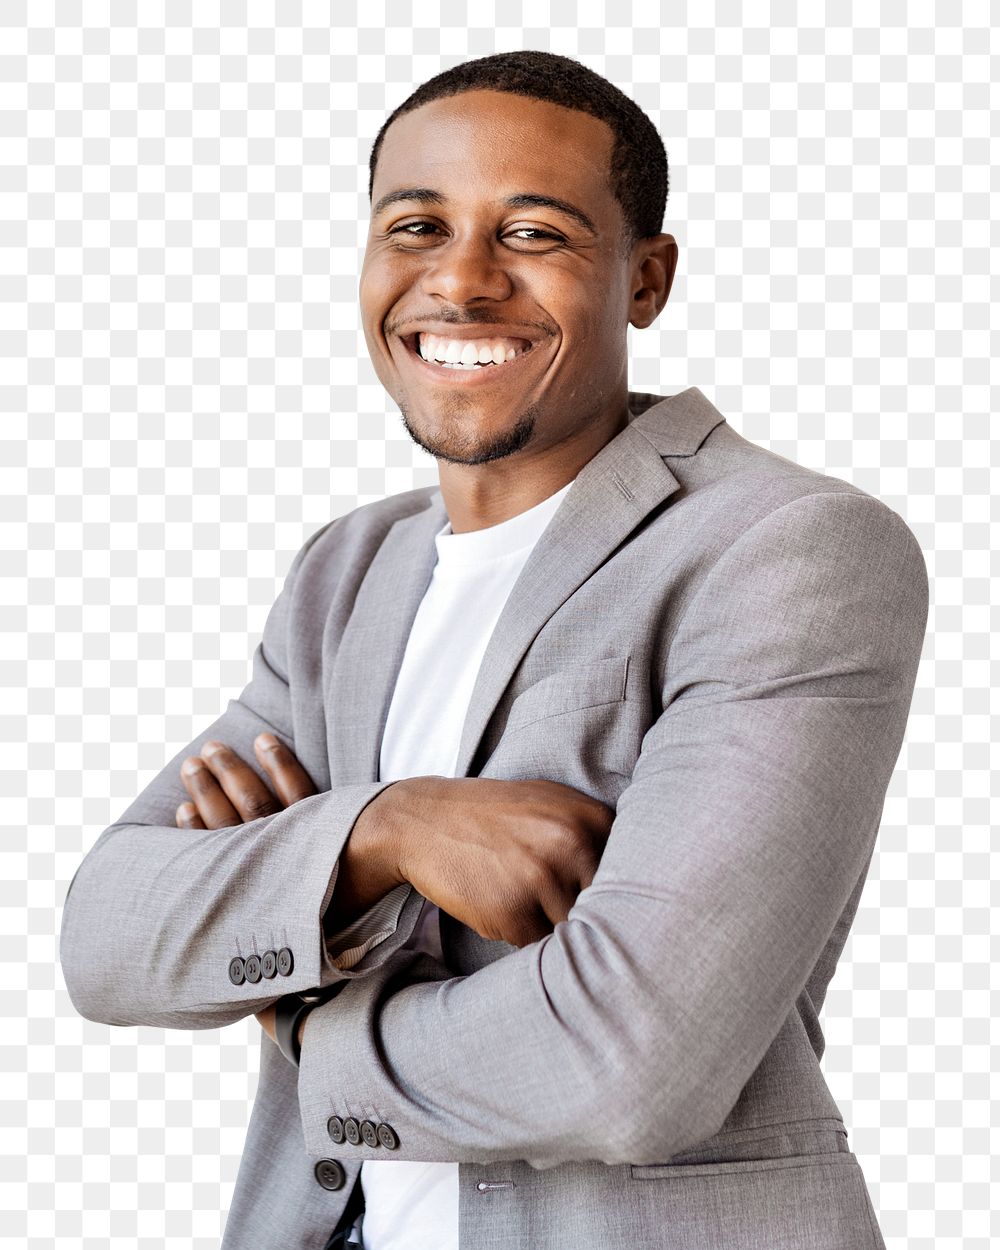 Cheerful businessman png portrait, crossing arm with a smile